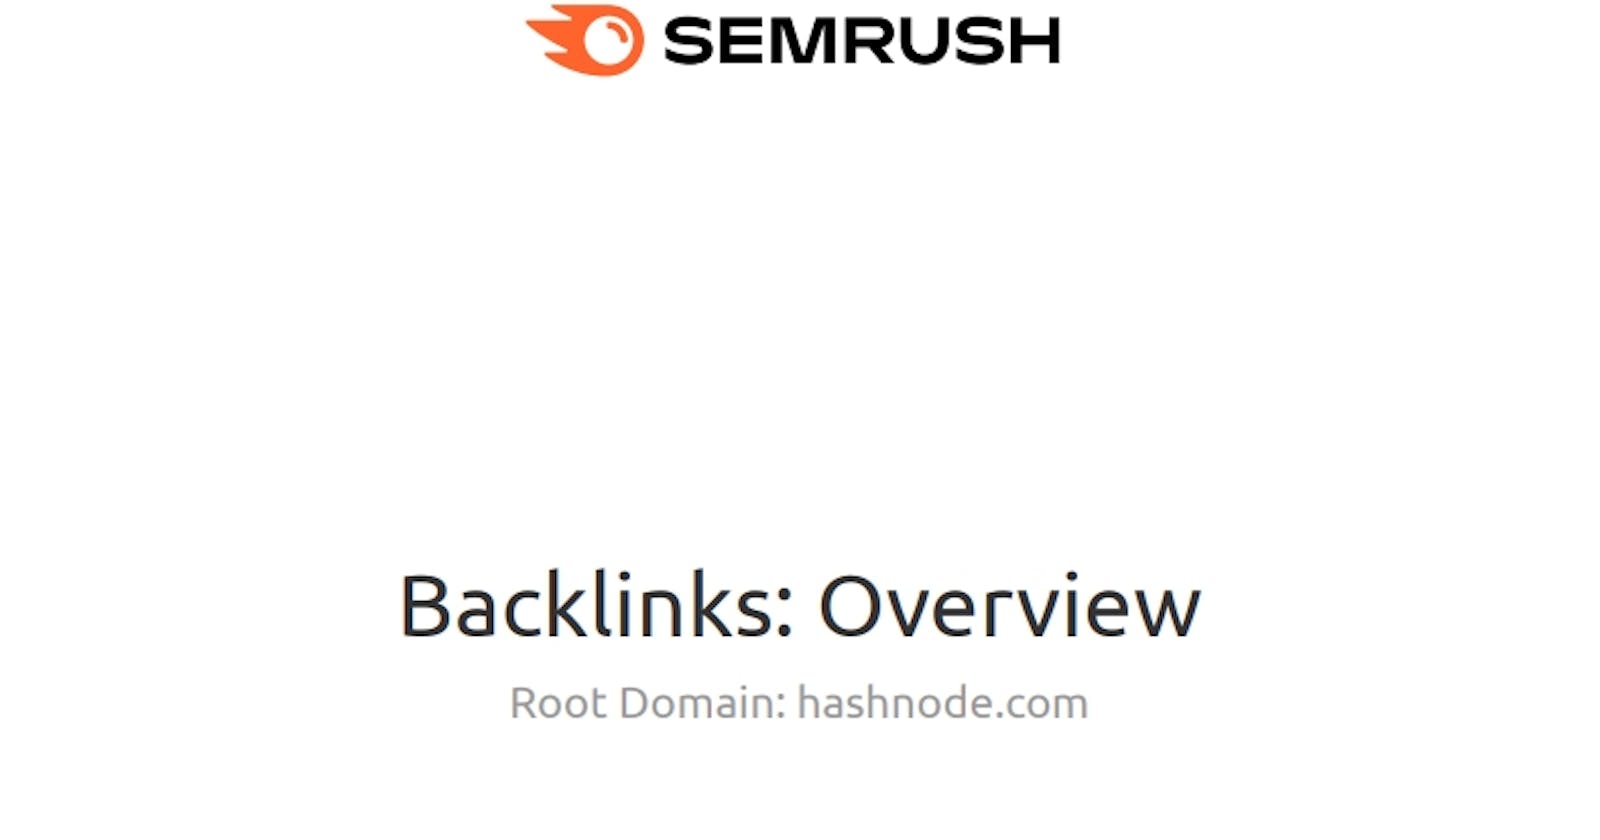 [Giveaway] Backlink Analysis Report